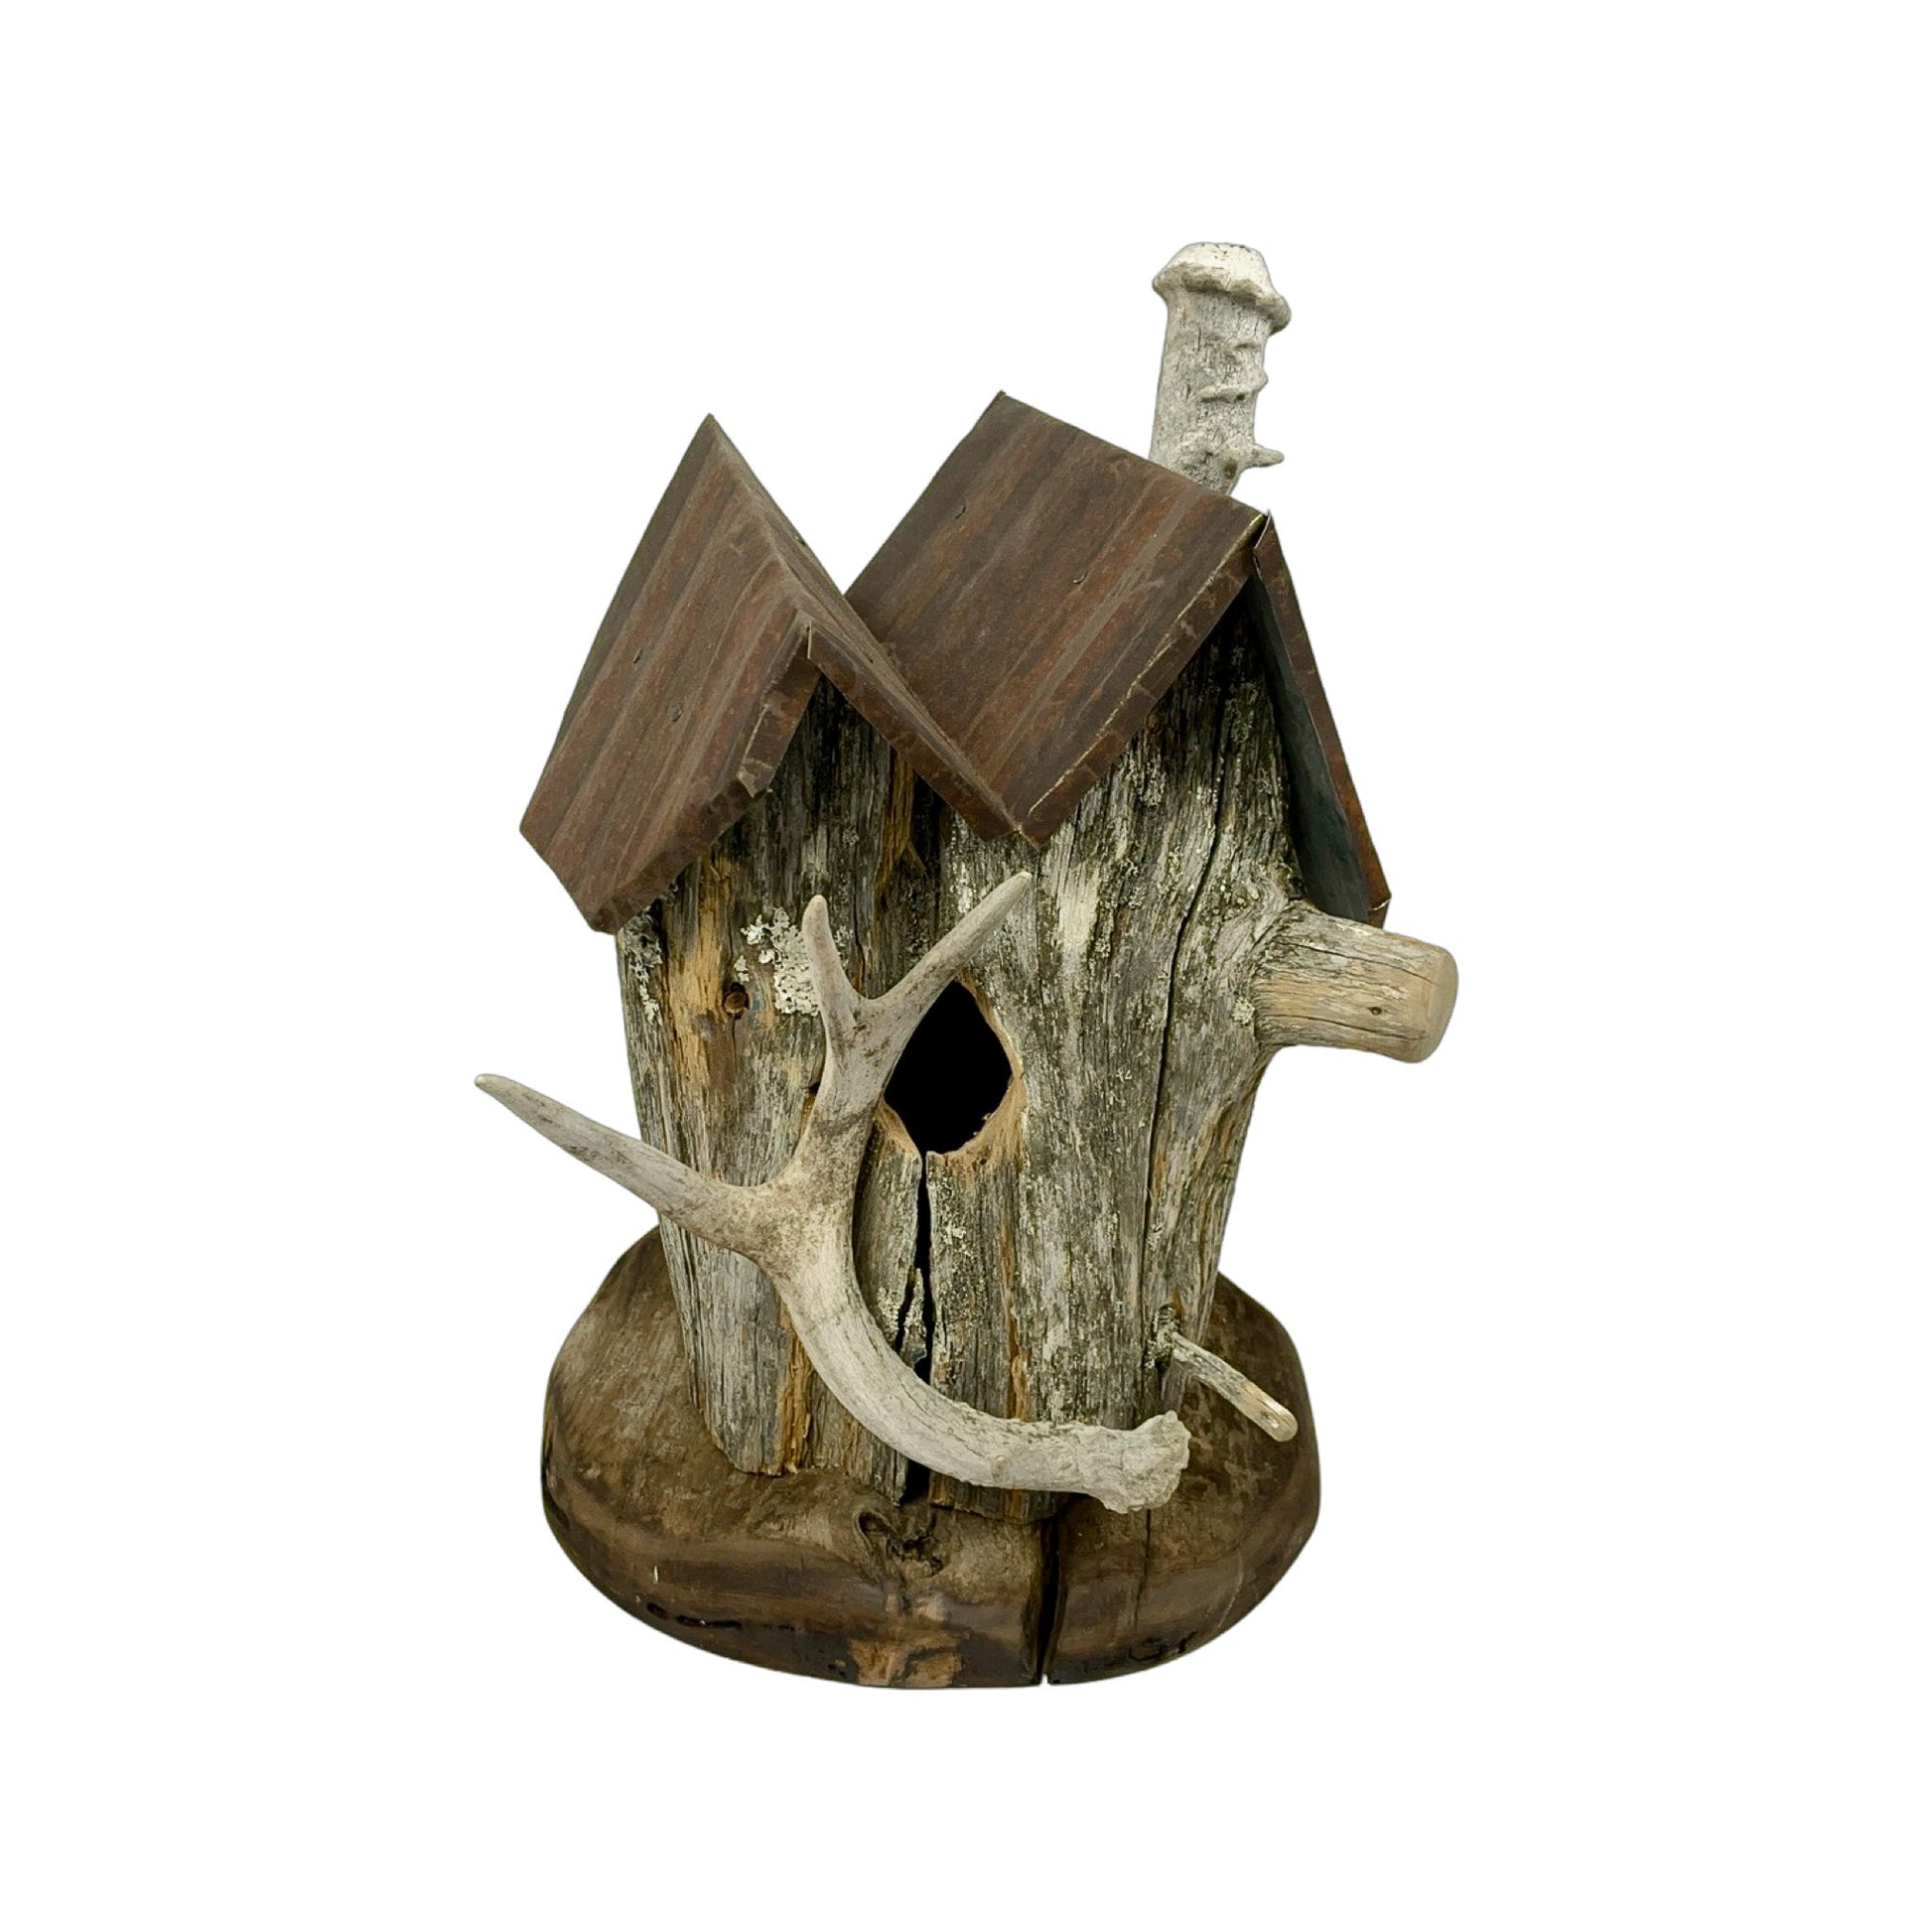 A hand made Birdhouse made from Driftwood